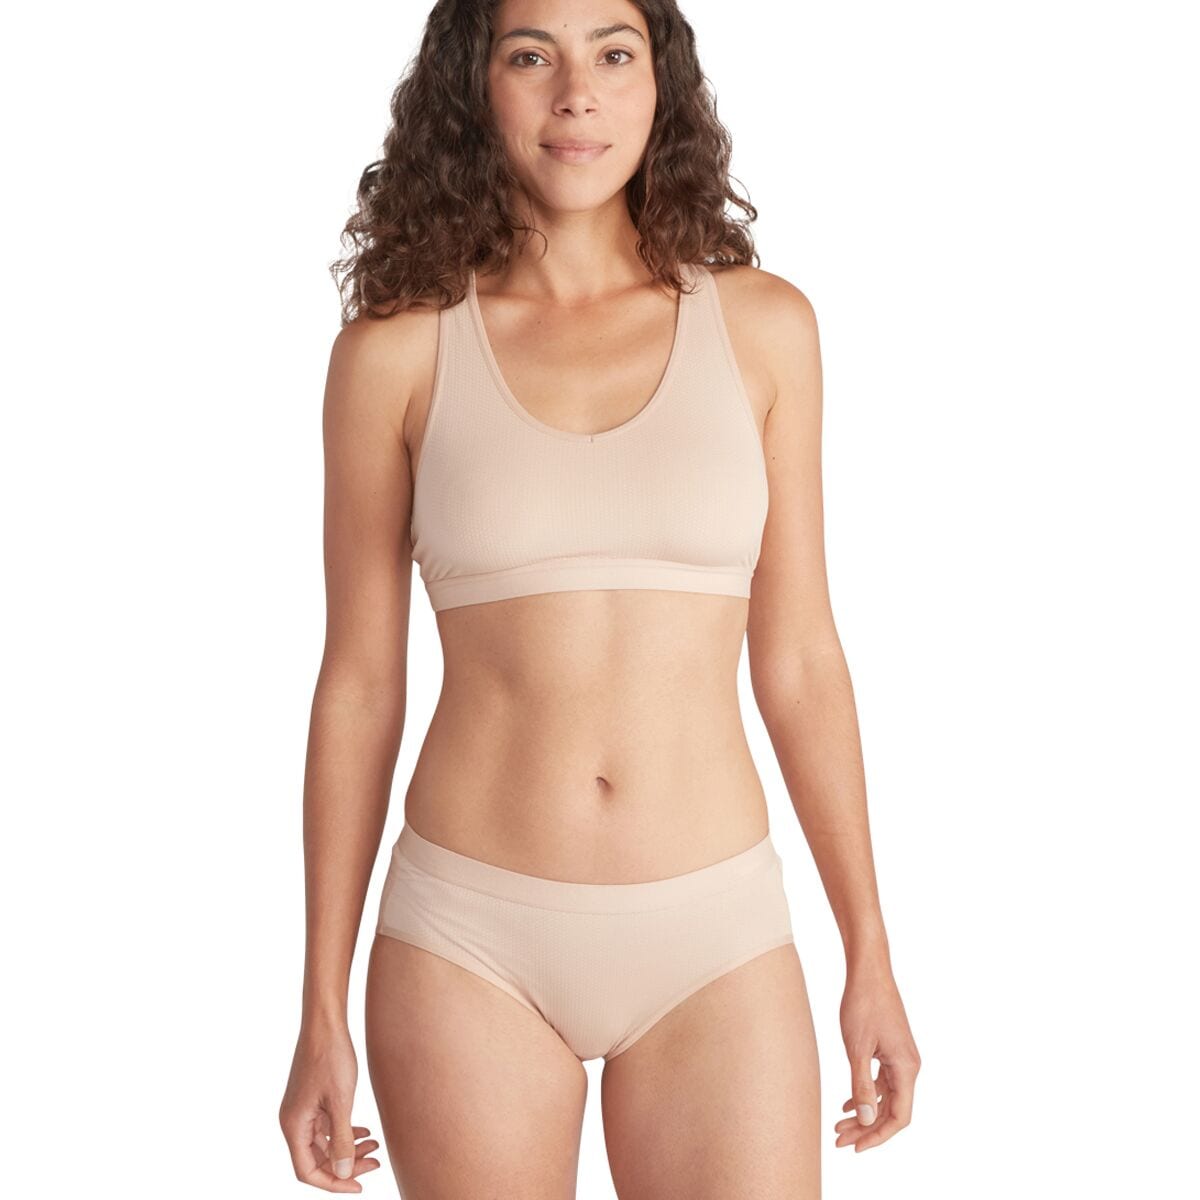 ExOfficio Women's Modern Travel Bikini has a lot of styles and colors for  you to choose